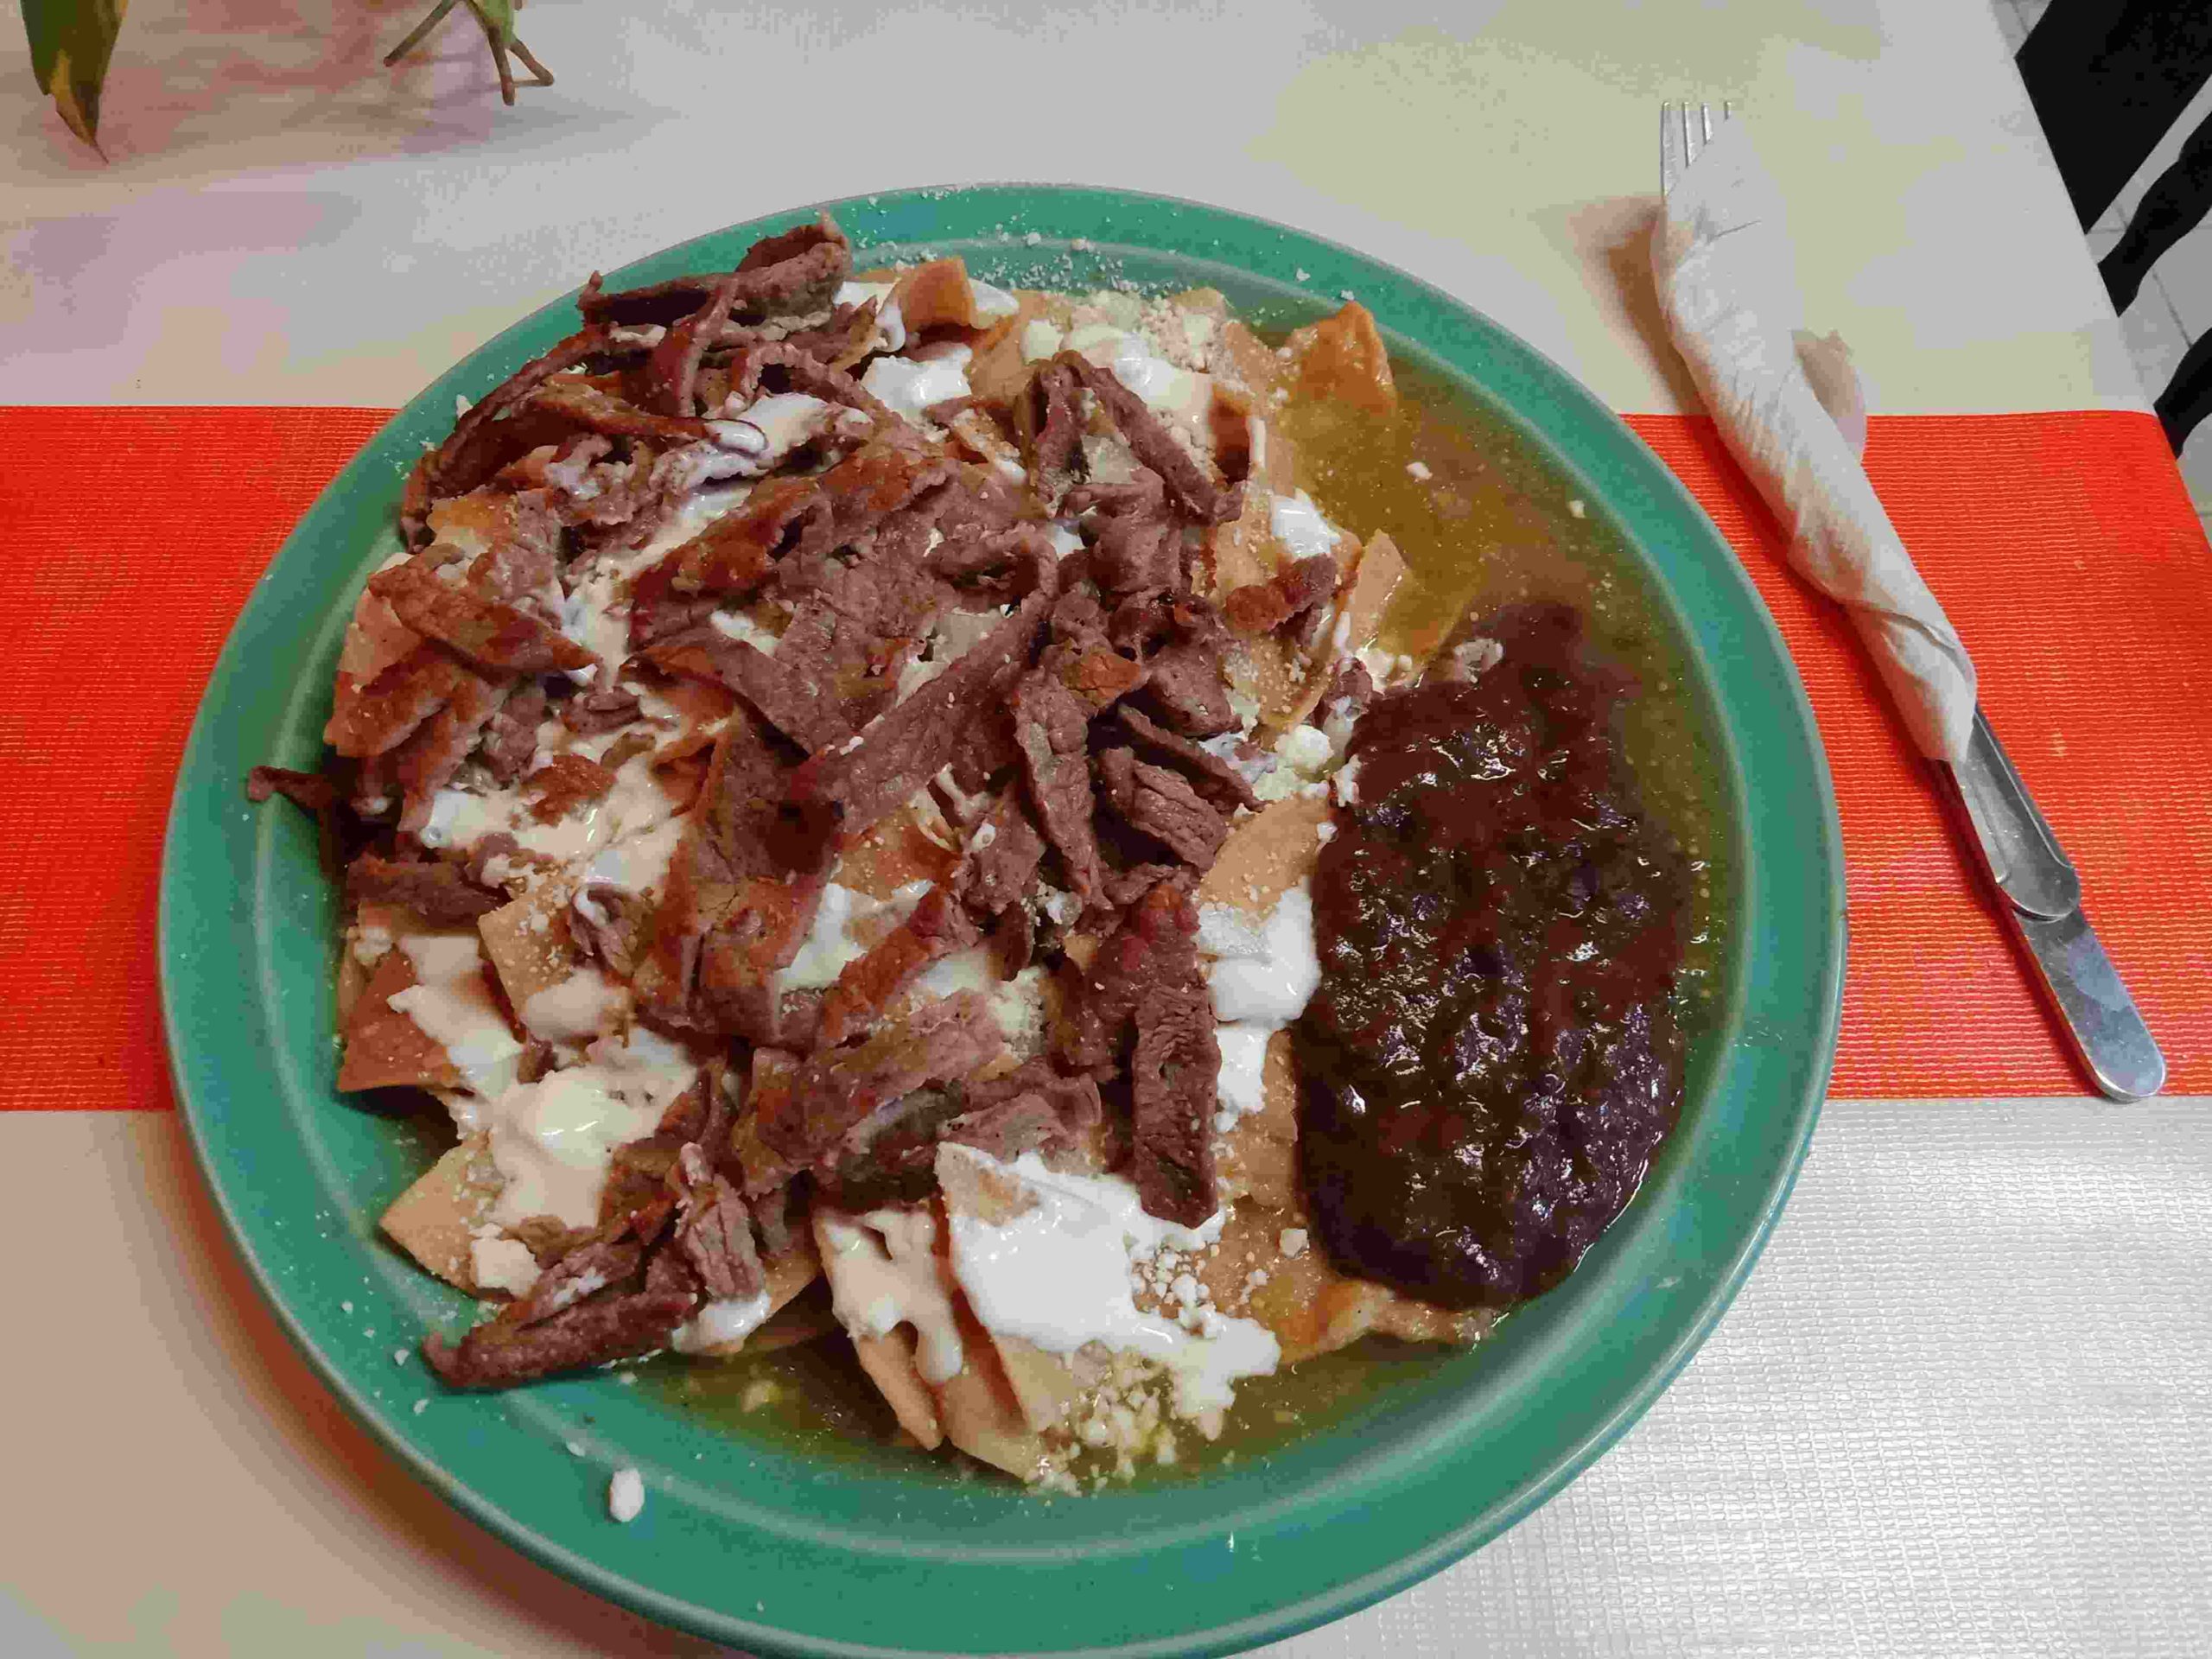 Chilaquiles, also known as "hangover" food in Mexico